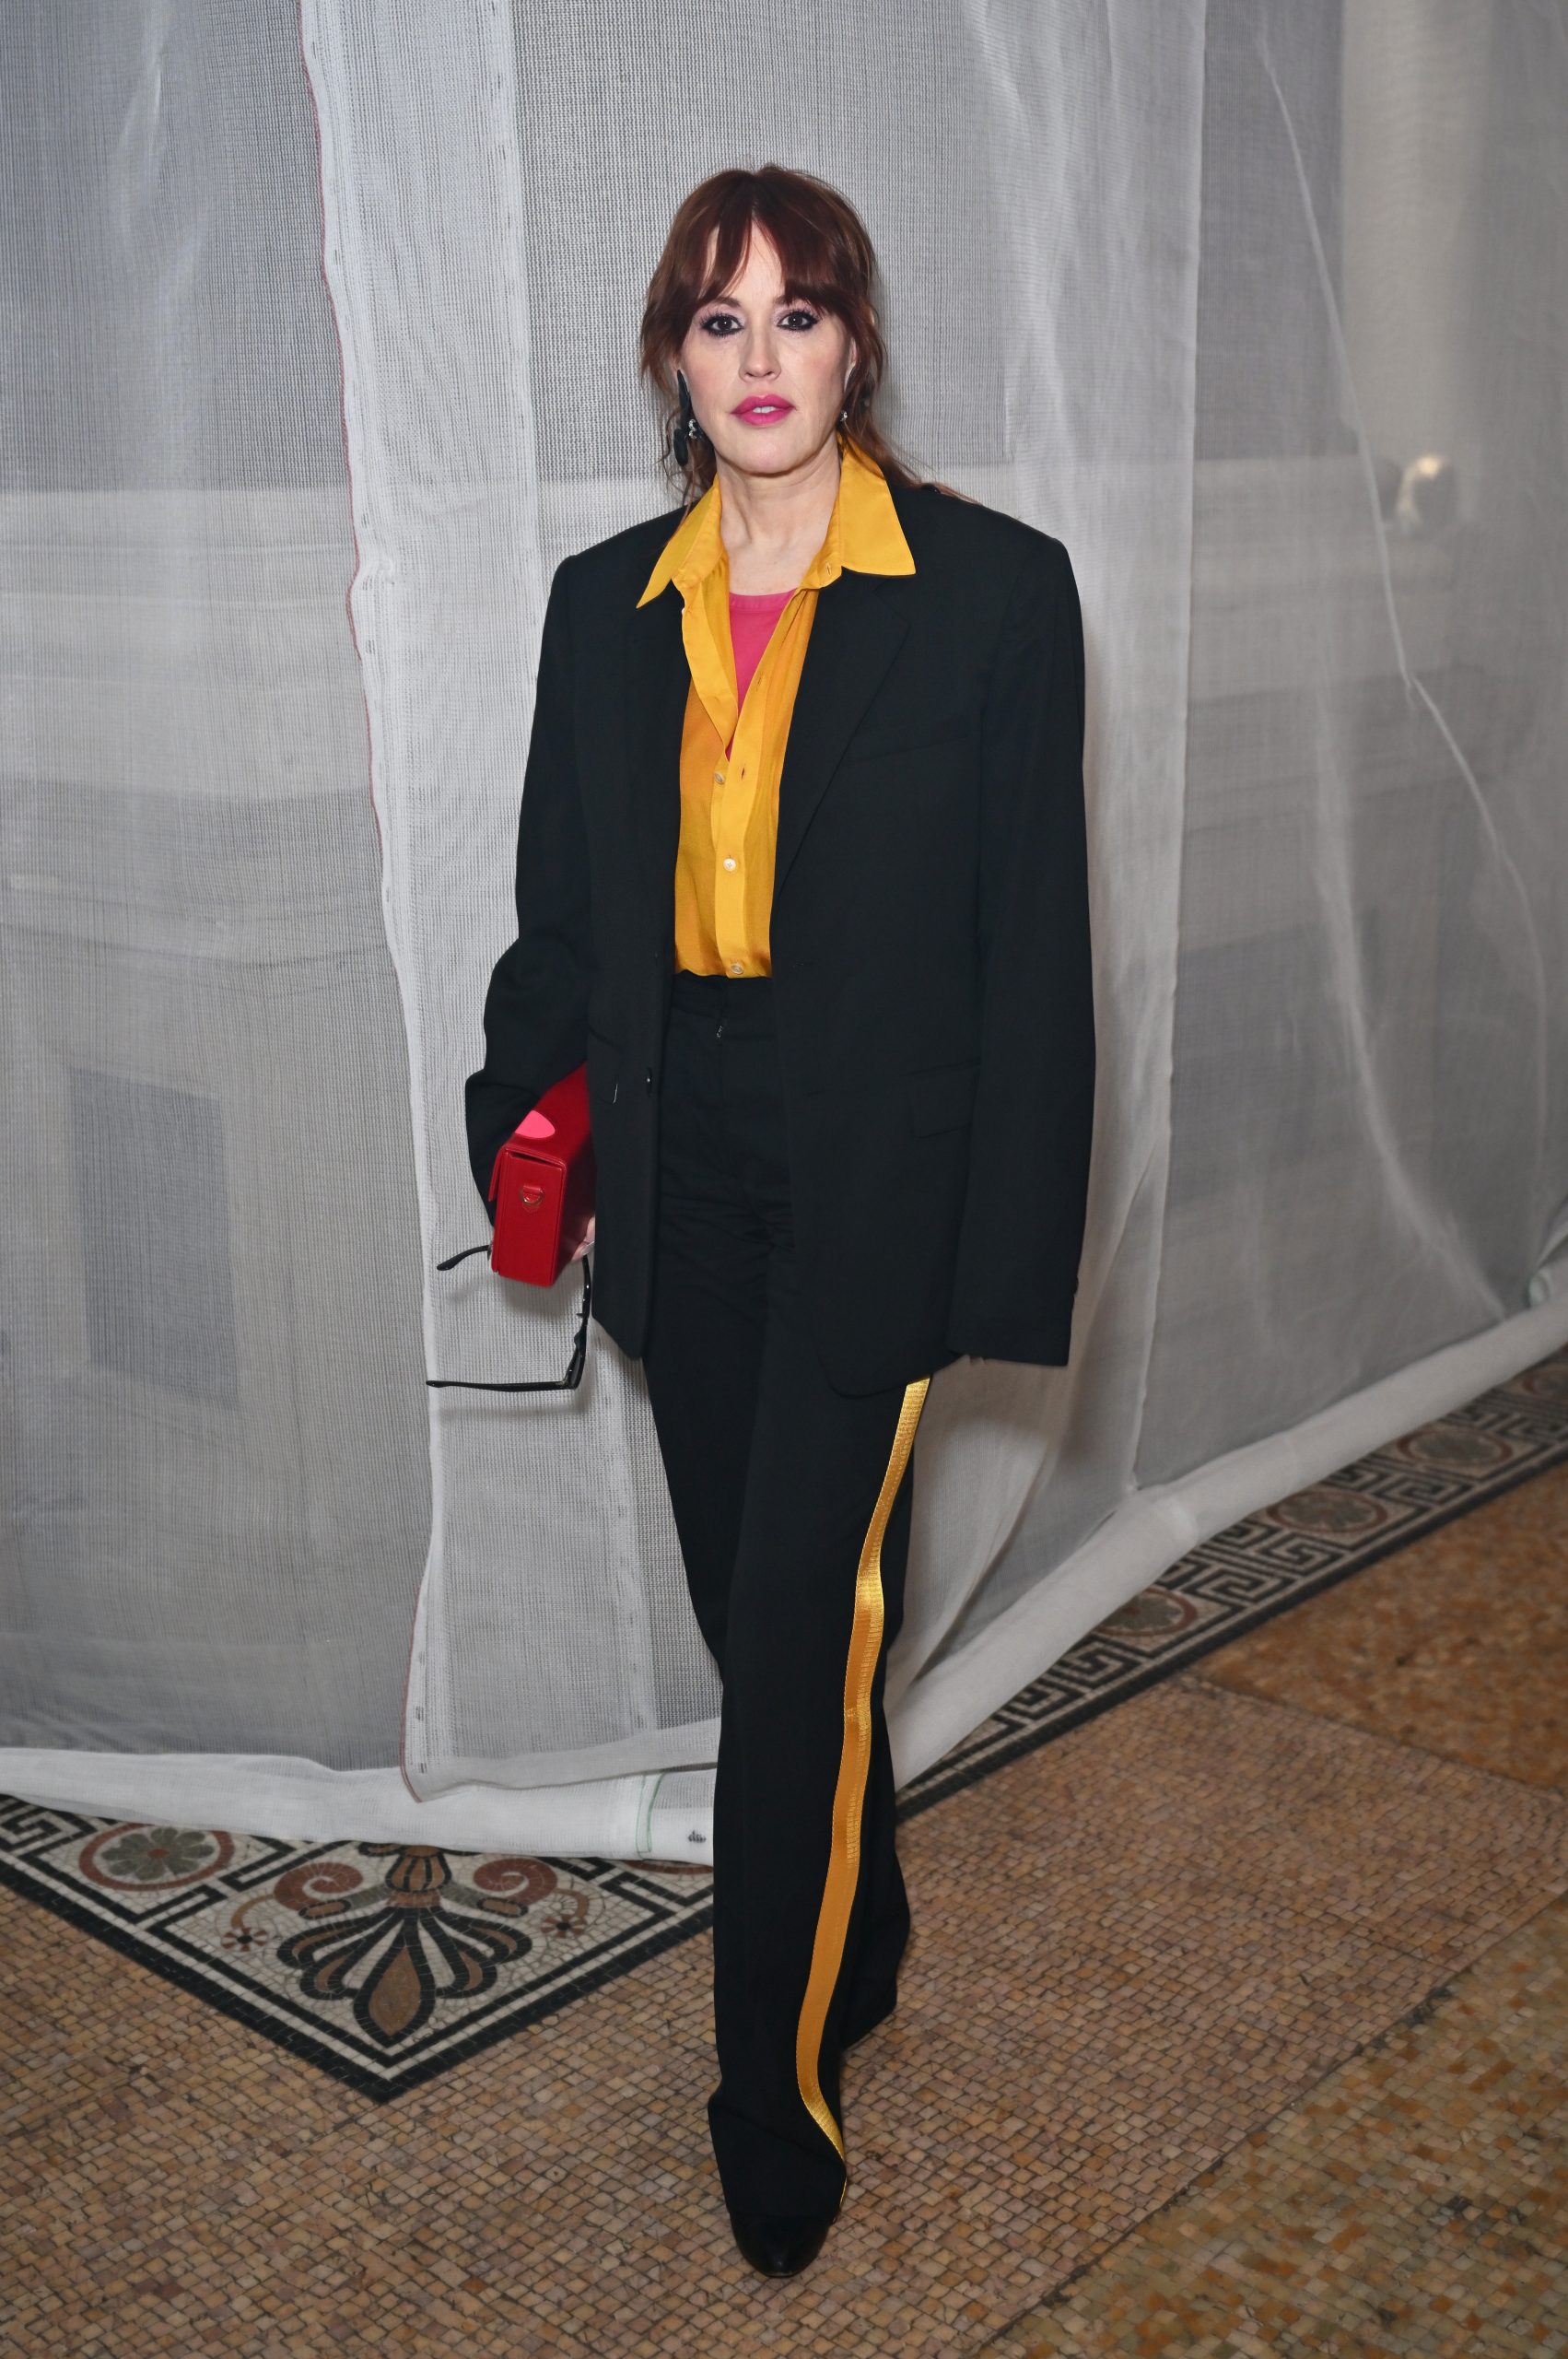 NEW YORK, NEW YORK - FEBRUARY 09: Molly Ringwald attends the Helmut Lang show during New York Fashion Week February 2024 on February 09, 2024 in New York City. (Photo by Jed Cullen/Dave Benett/Getty Images)